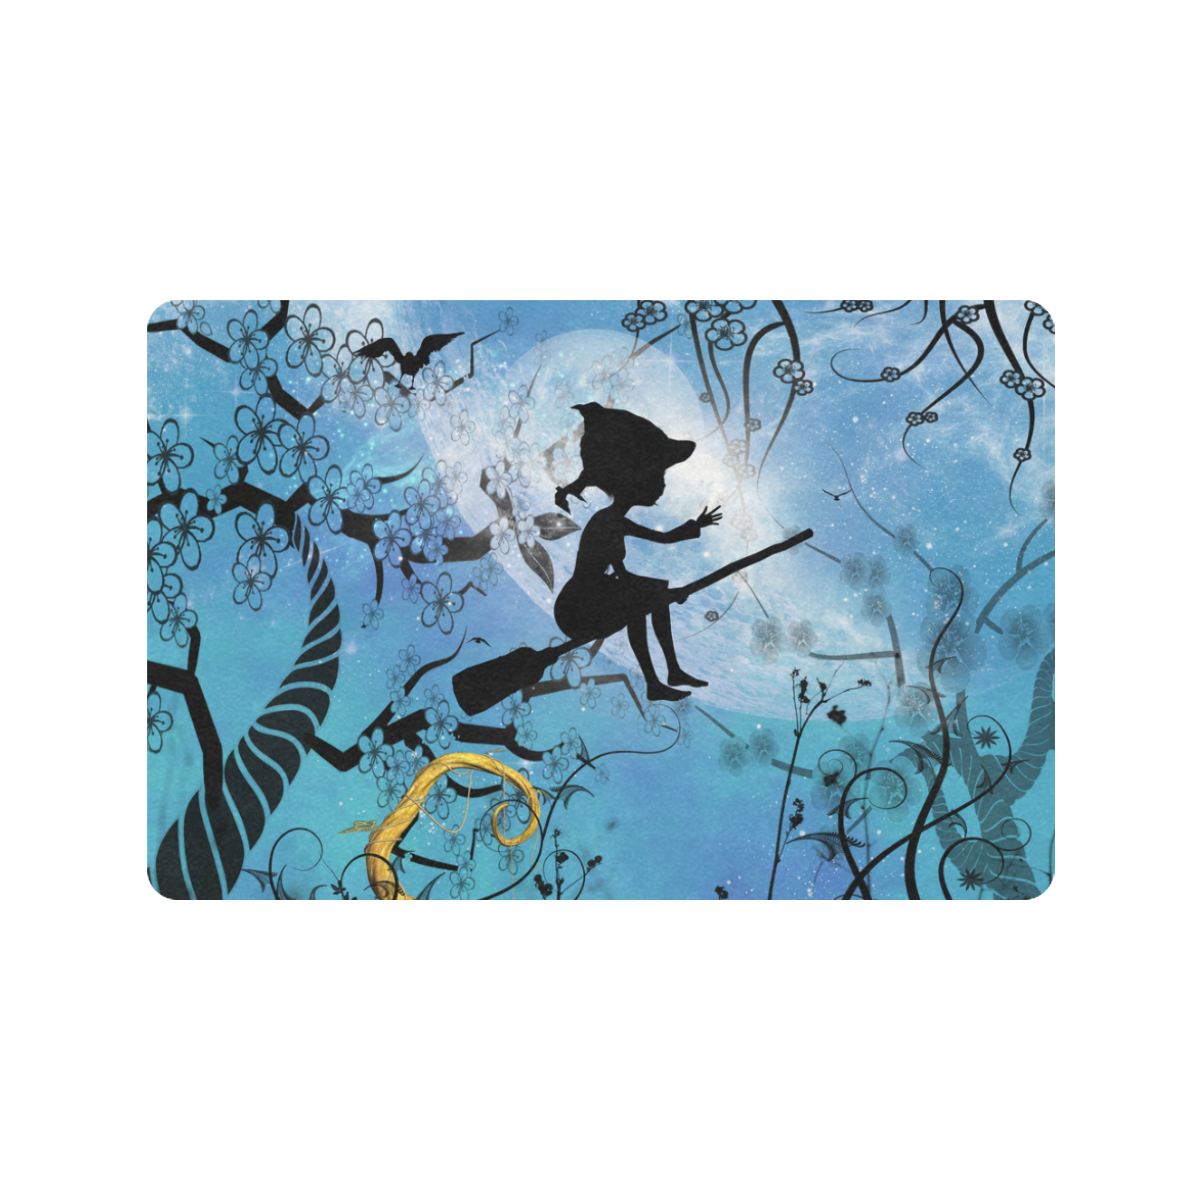 Cute flying witch Doormat 24"x16" (Black Base)